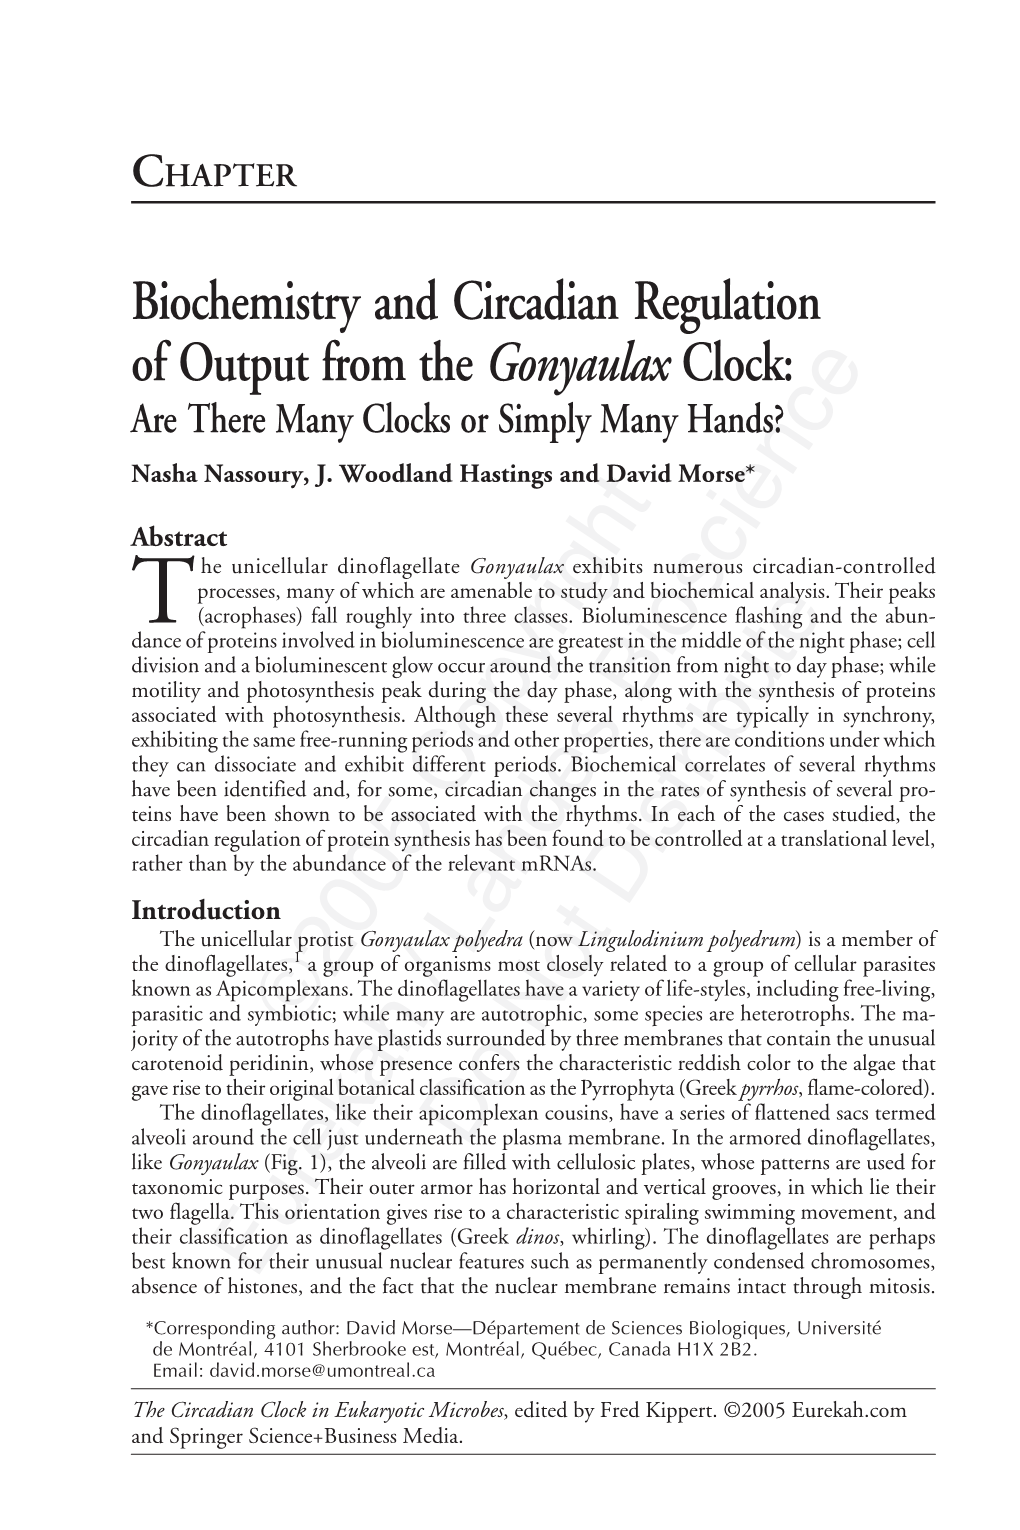 Biochemistry and Circadian Regulation of Output from the Gonyaulax Clock: Are There Many Clocks Or Simply Many Hands? Nasha Nassoury, J